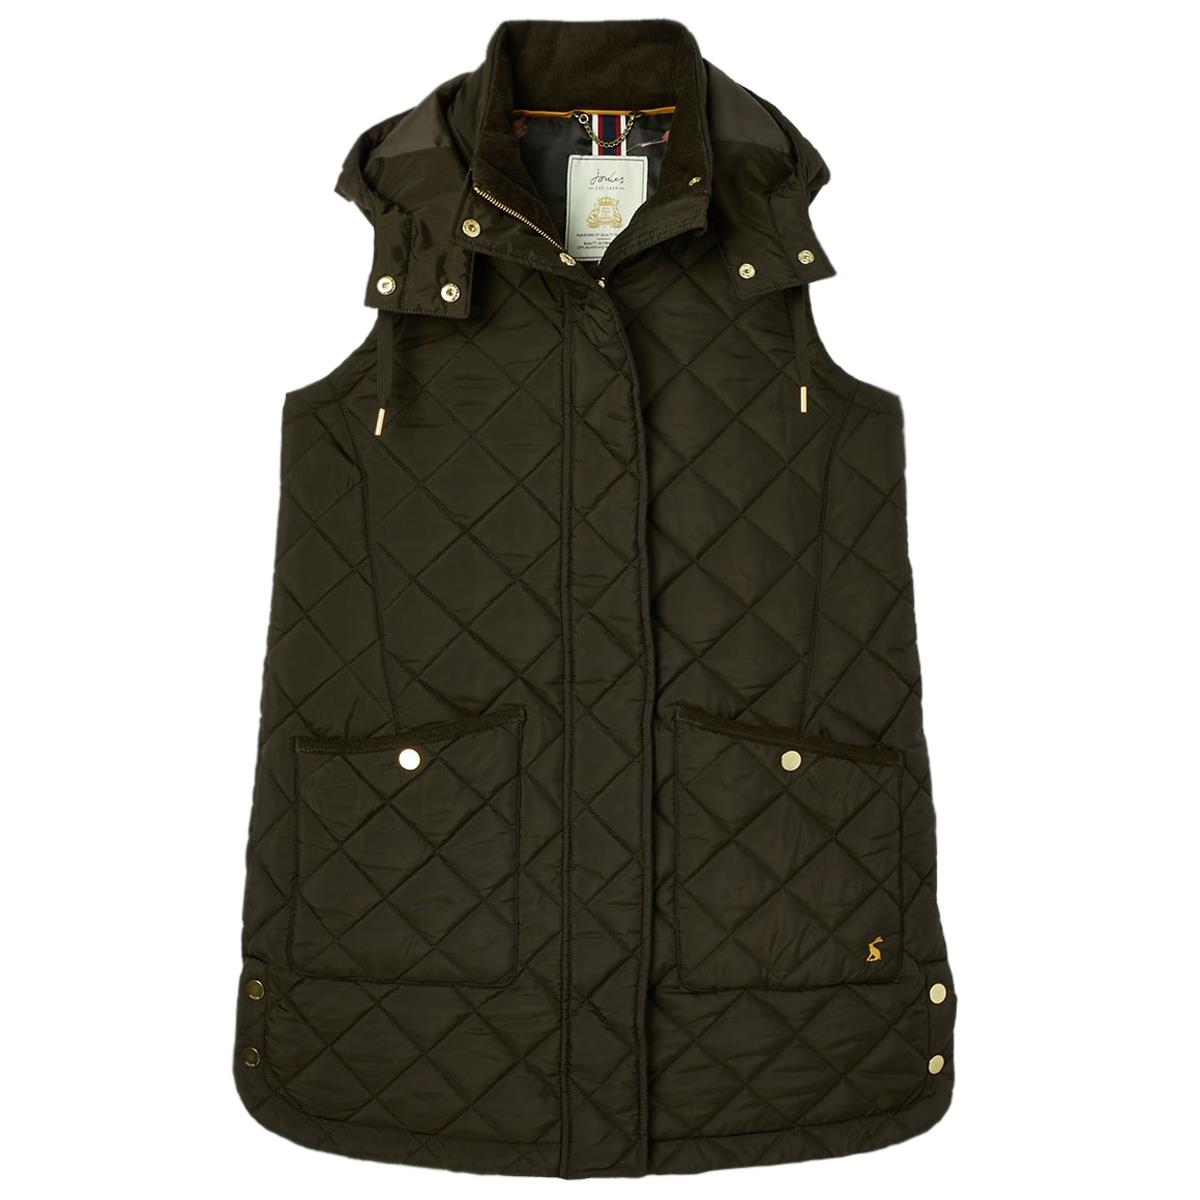 What is the fastening method of the Joules Chatham Gilet?